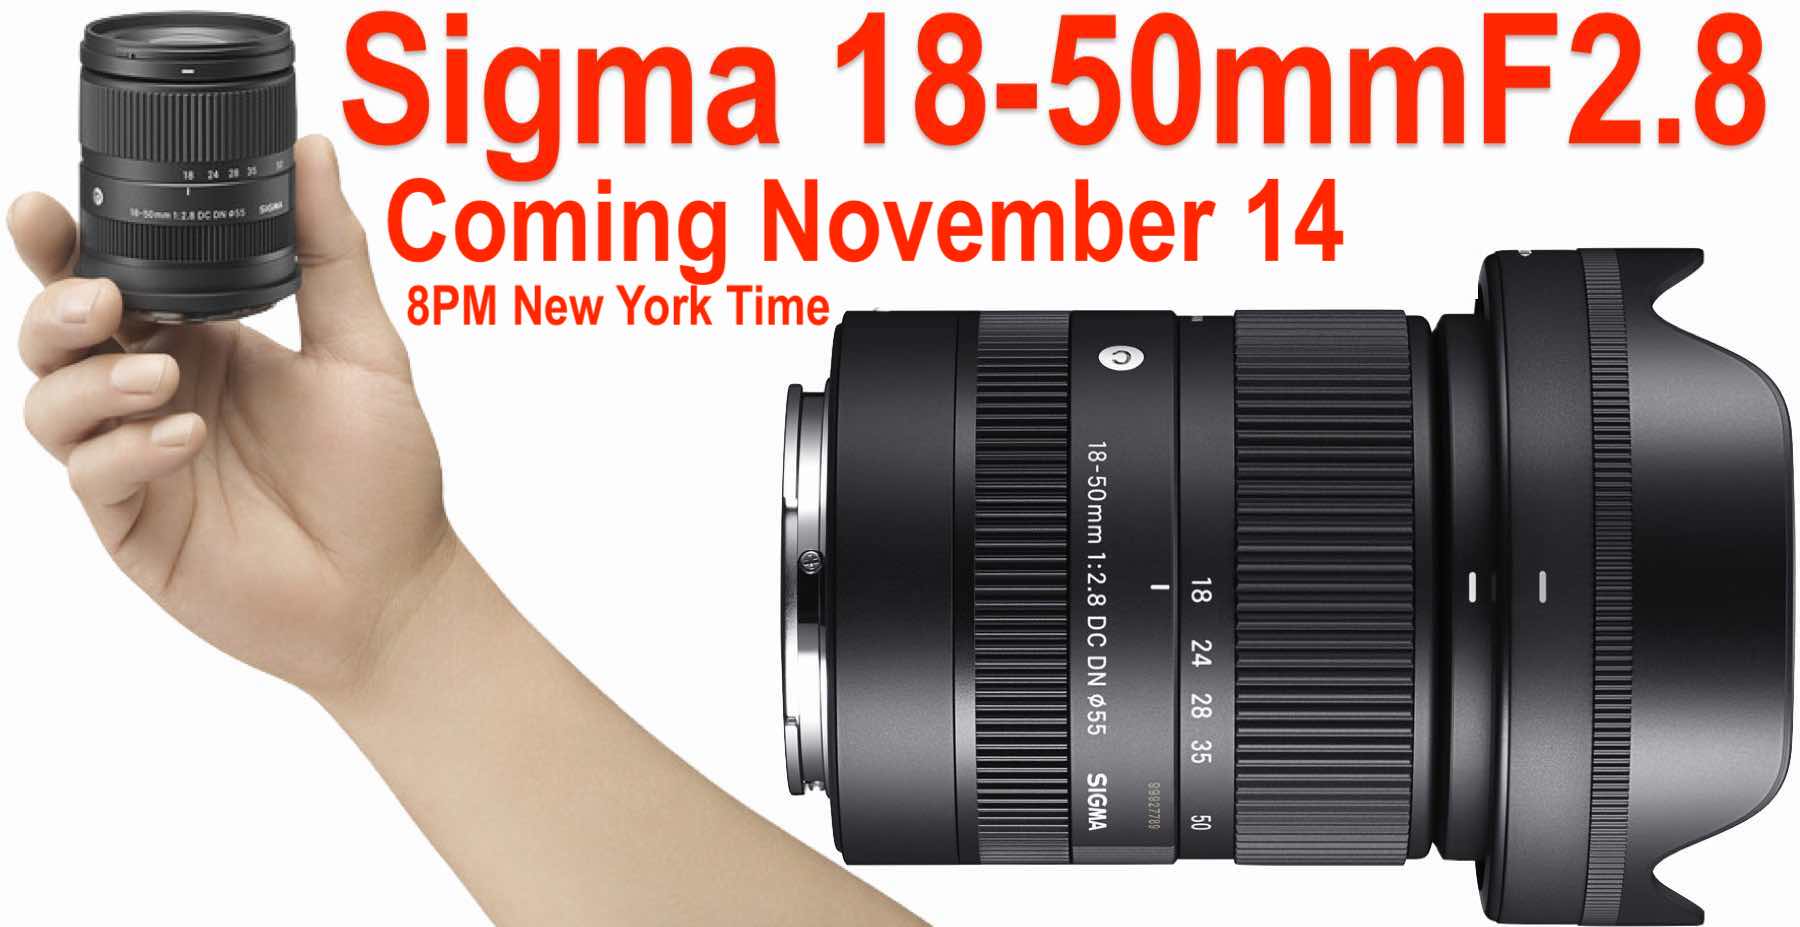 Sigma 18-50mm f/2.8 for Fujifilm X mount Coming November 14 at 8PM